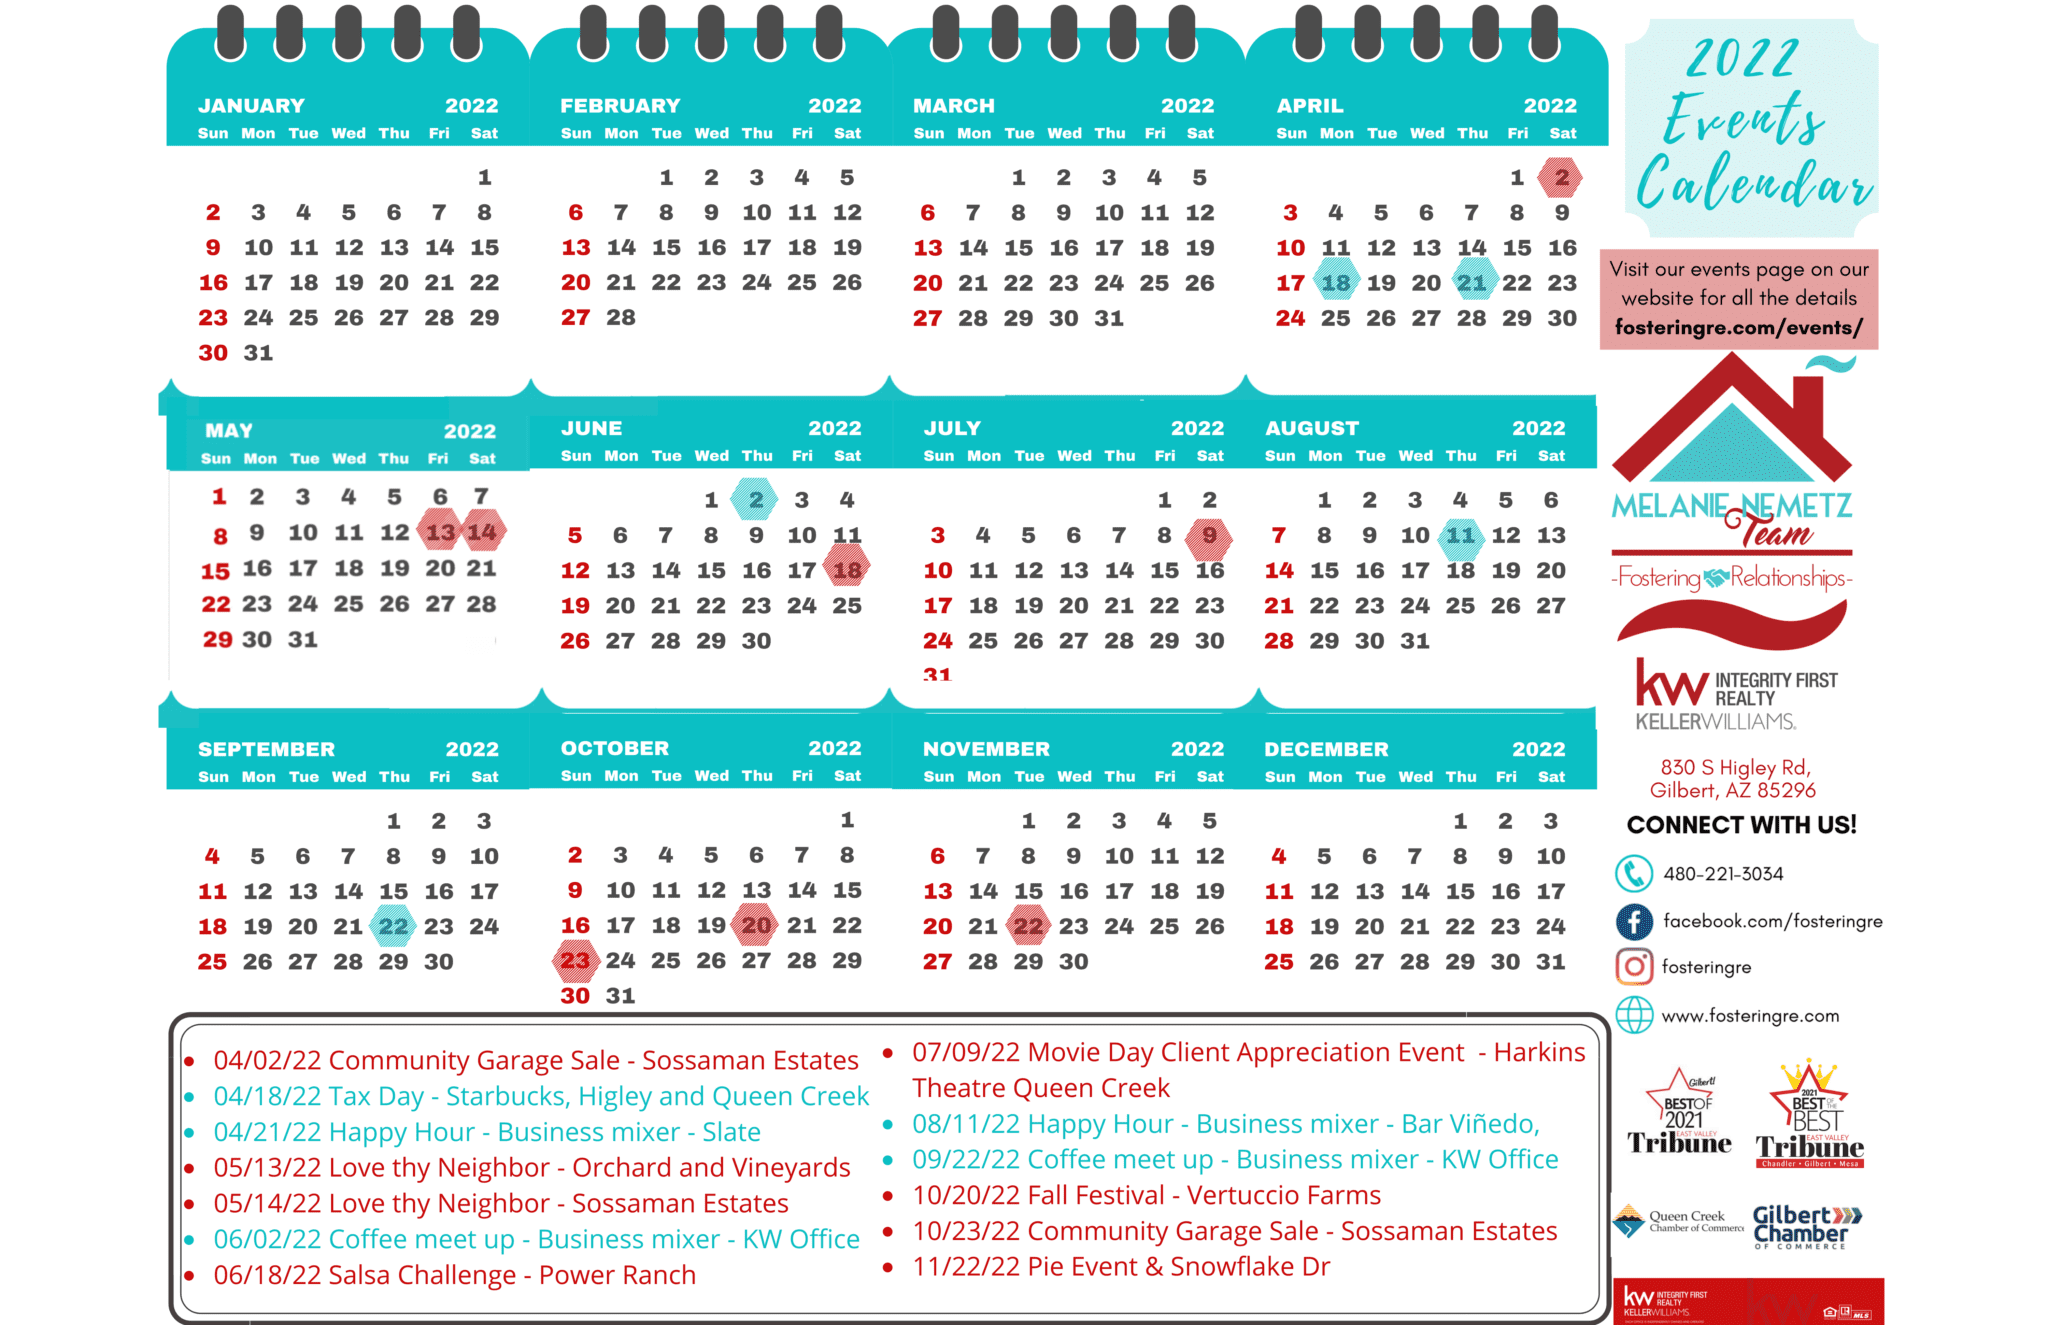 ALL - 2022 Events Calendar (8.5 × 5.5 in)